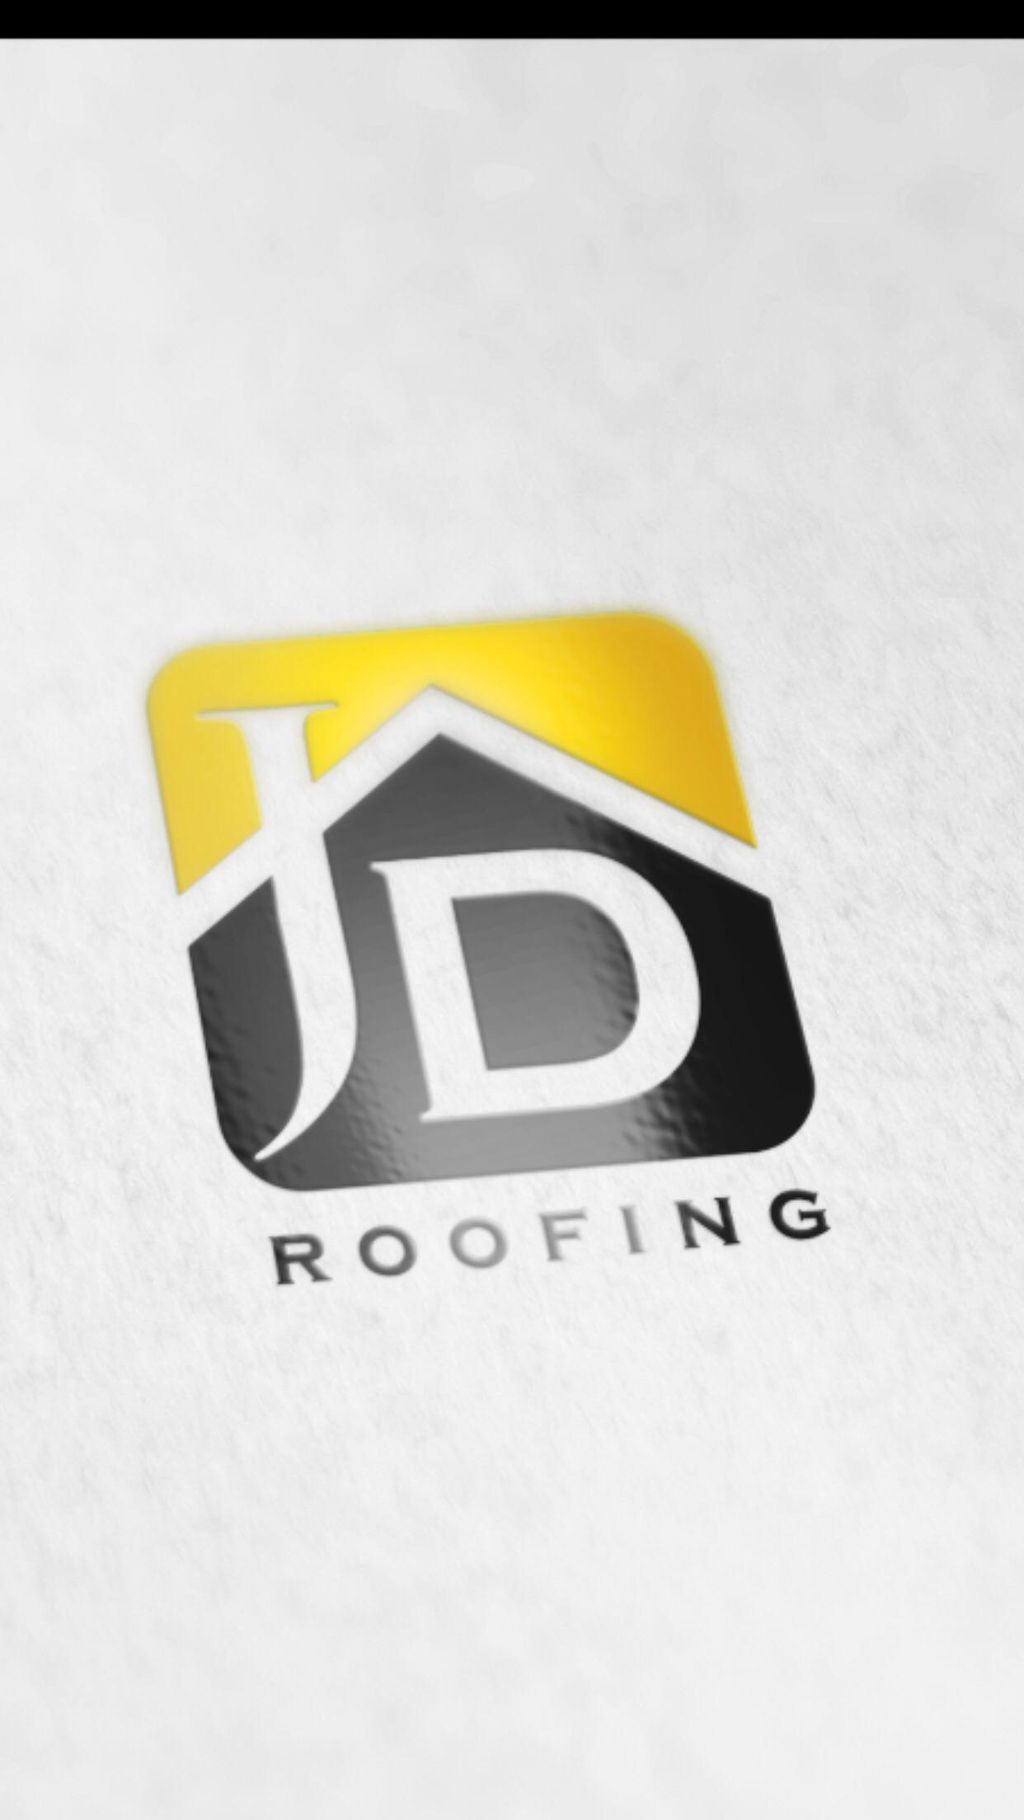 JD Roofing